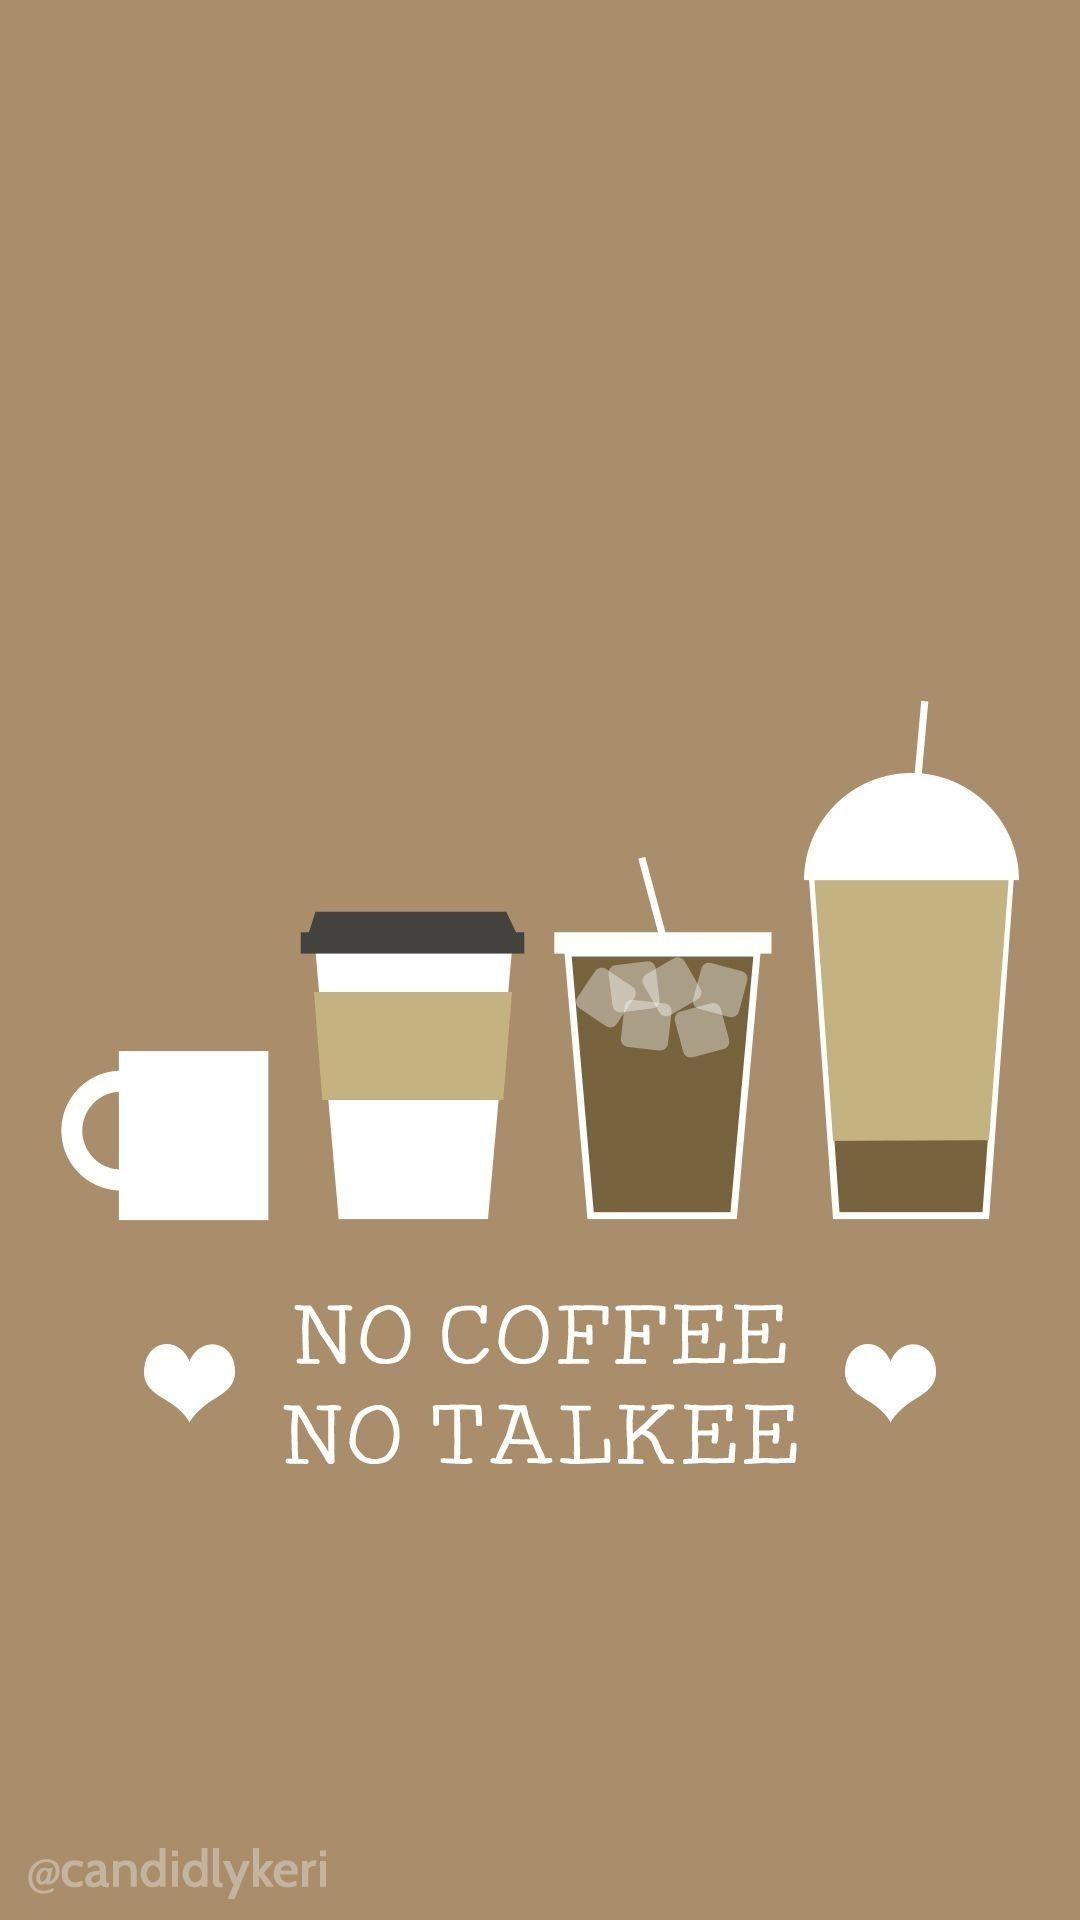 Wallpaper android Coffee Fresh 30 Best Better together Image On